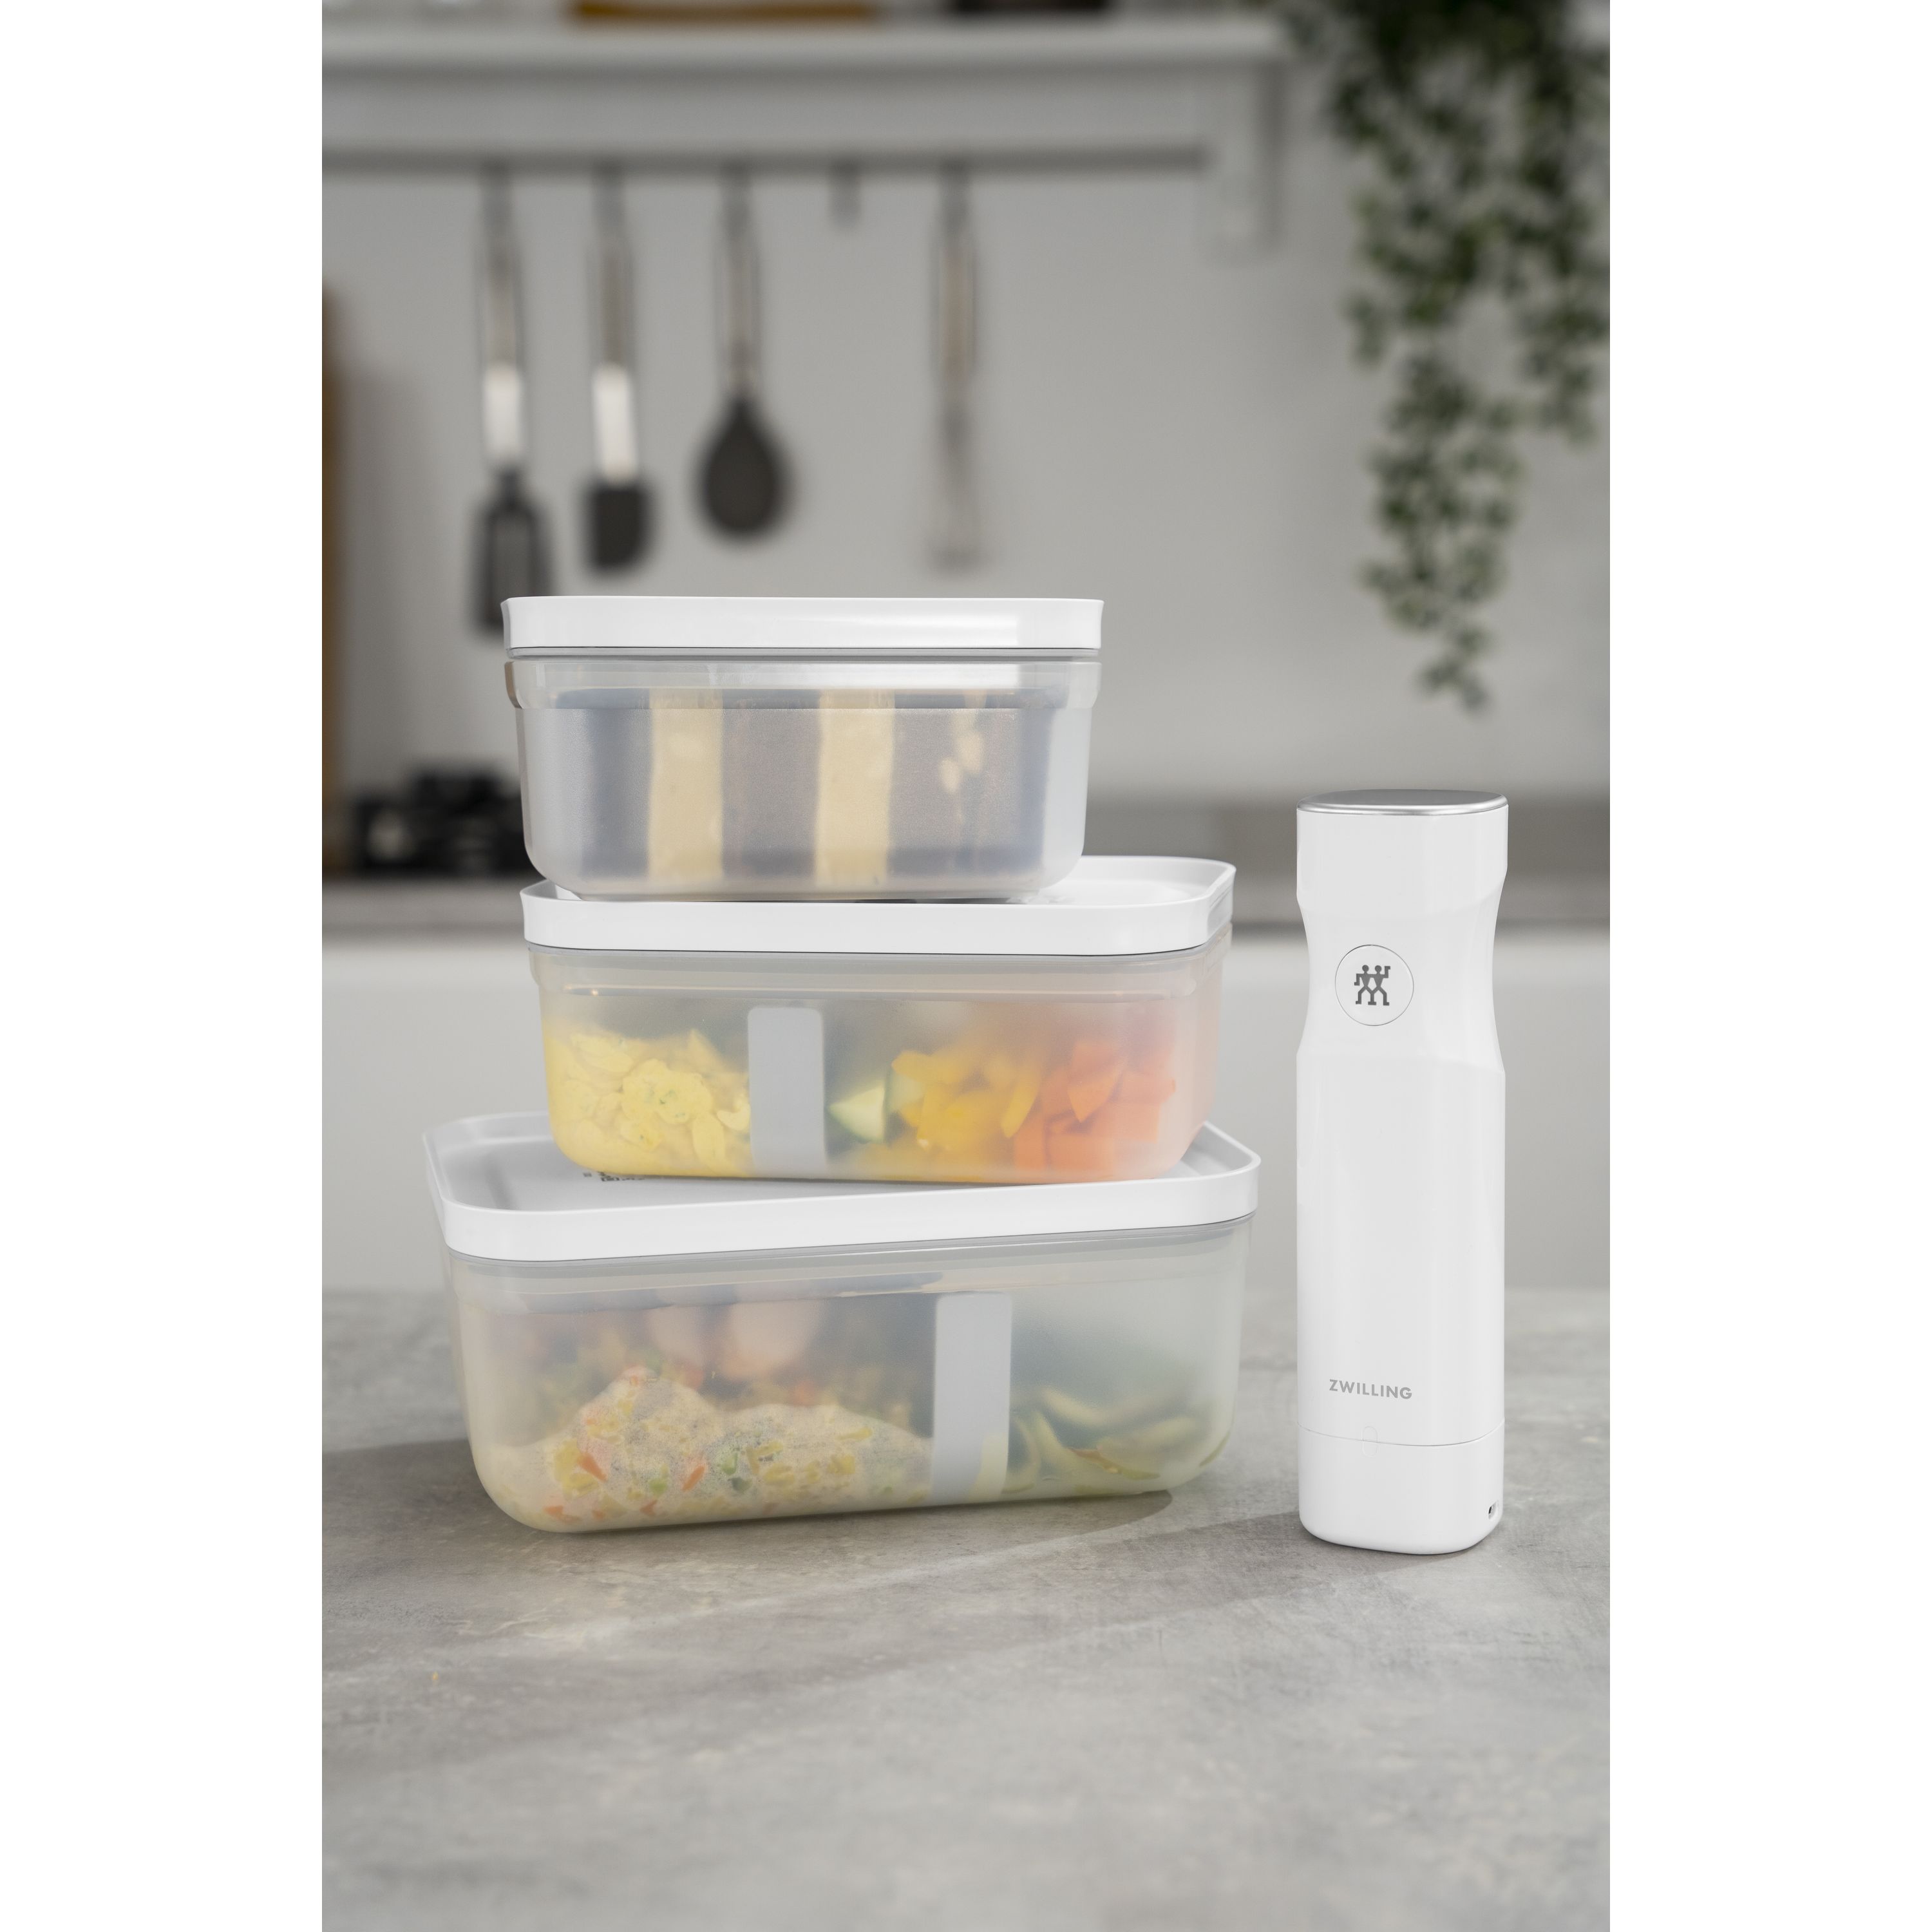 ZWILLING Small Fresh & Save Lunch Box + Reviews, Crate & Barrel